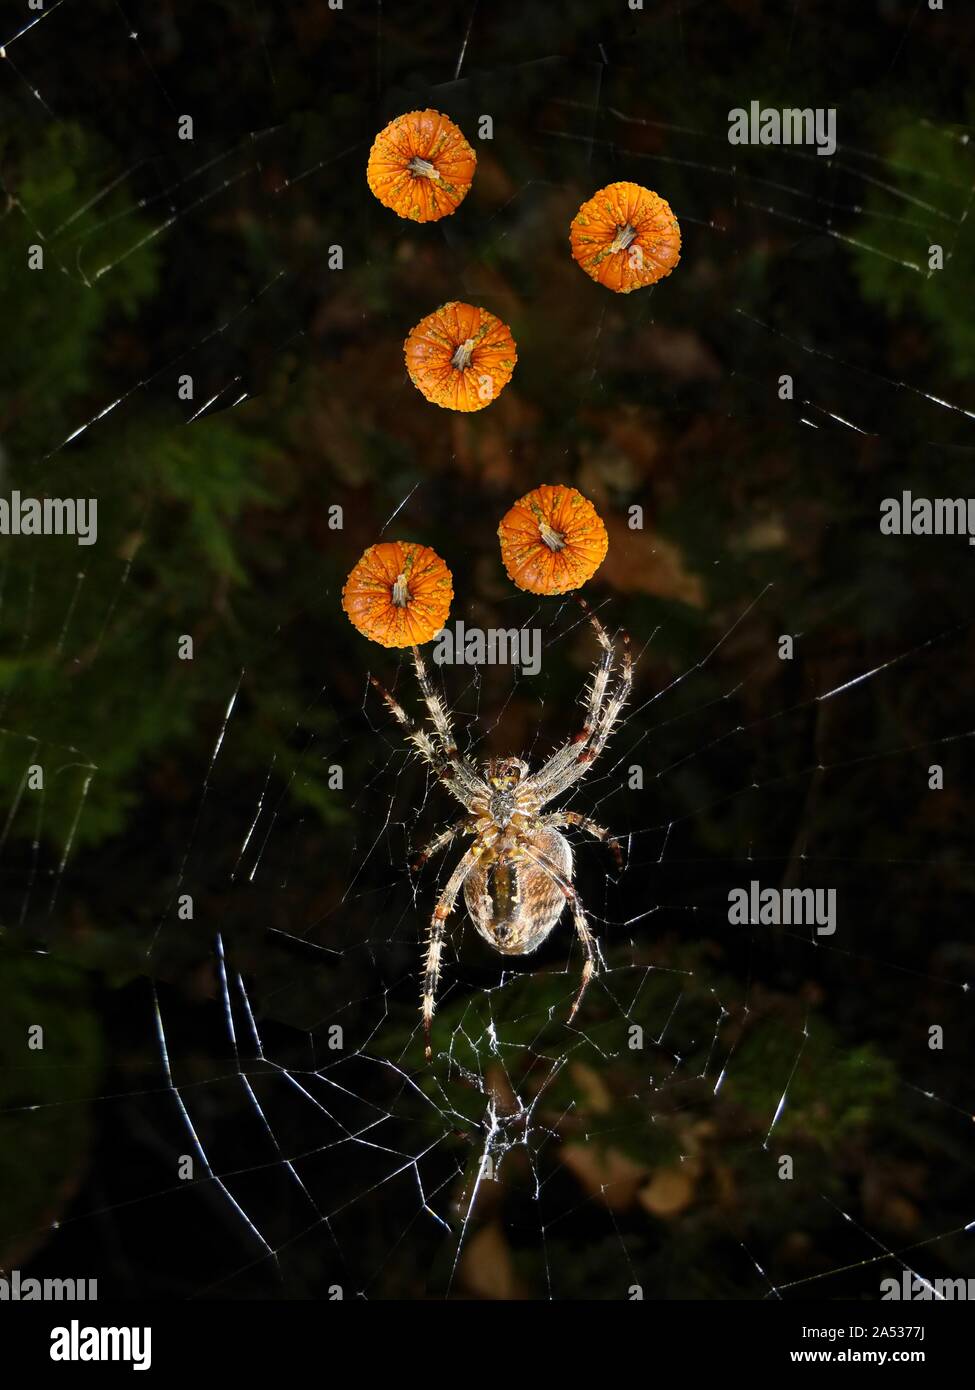 Isolated images of a bumpy pumpkin pasted upon a picture of an orb weaver spider in a juggling pattern for Halloween Stock Photo